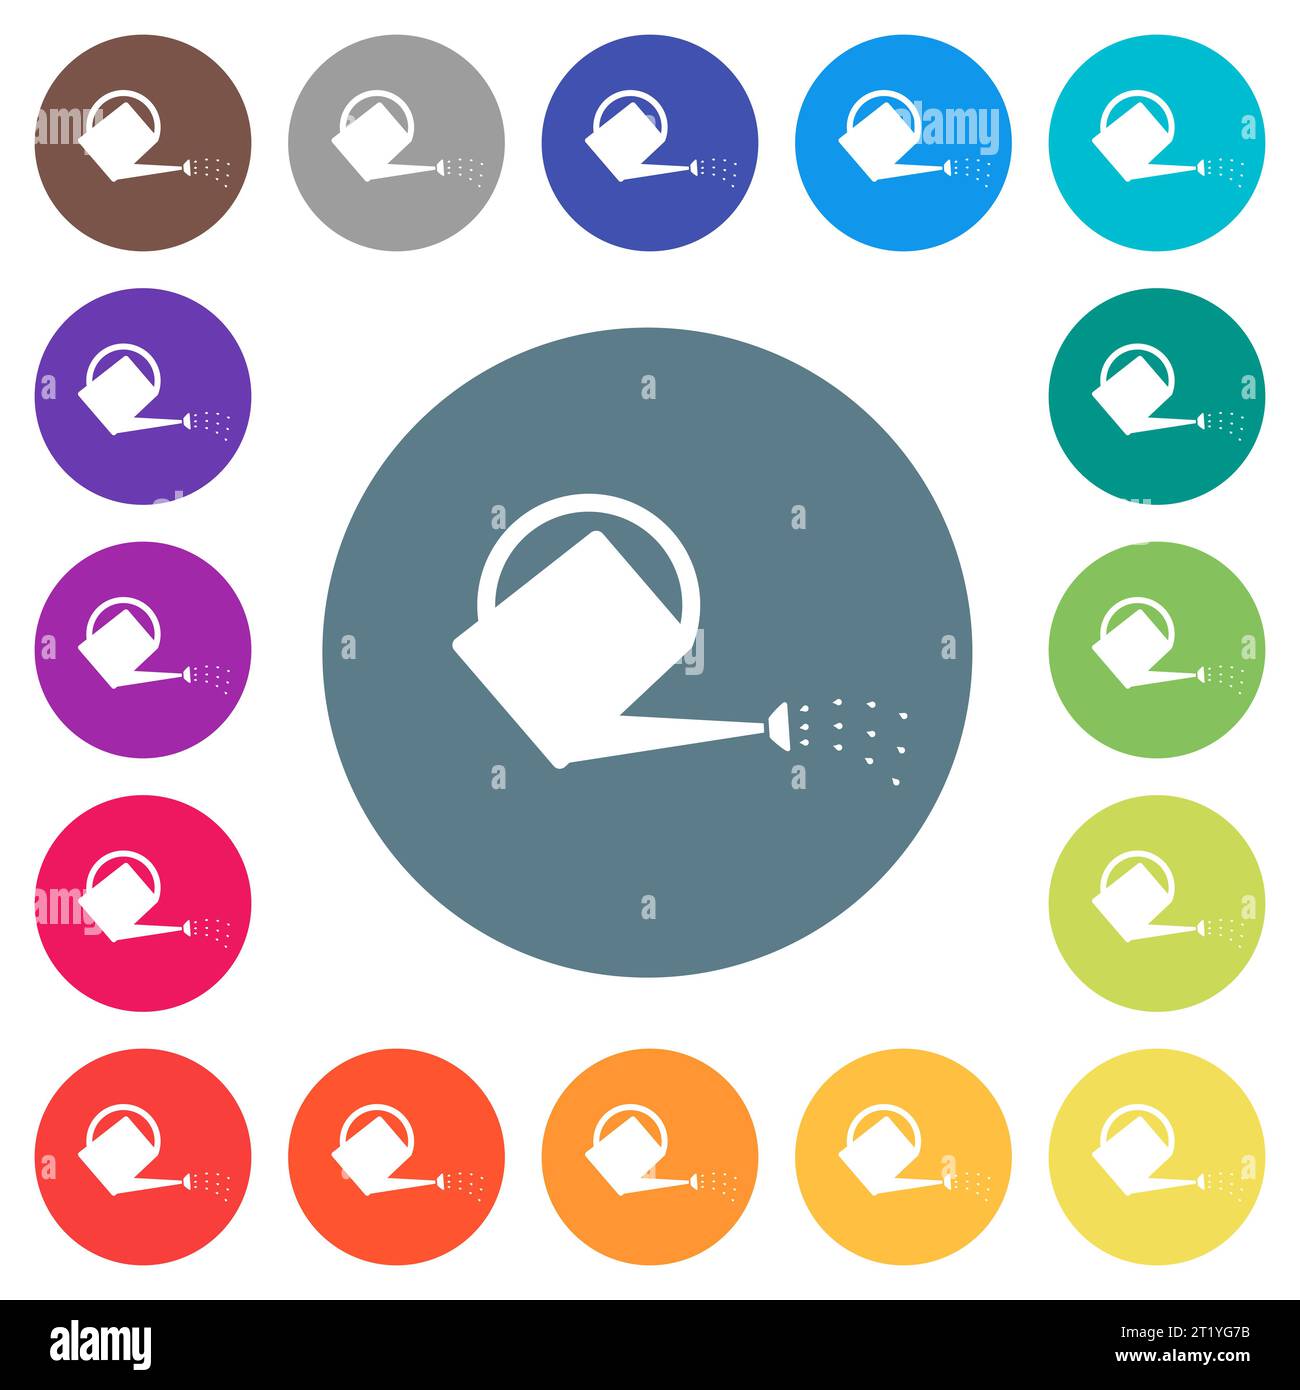 Watering can flat white icons on round color backgrounds. 17 background color variations are included. Stock Vector